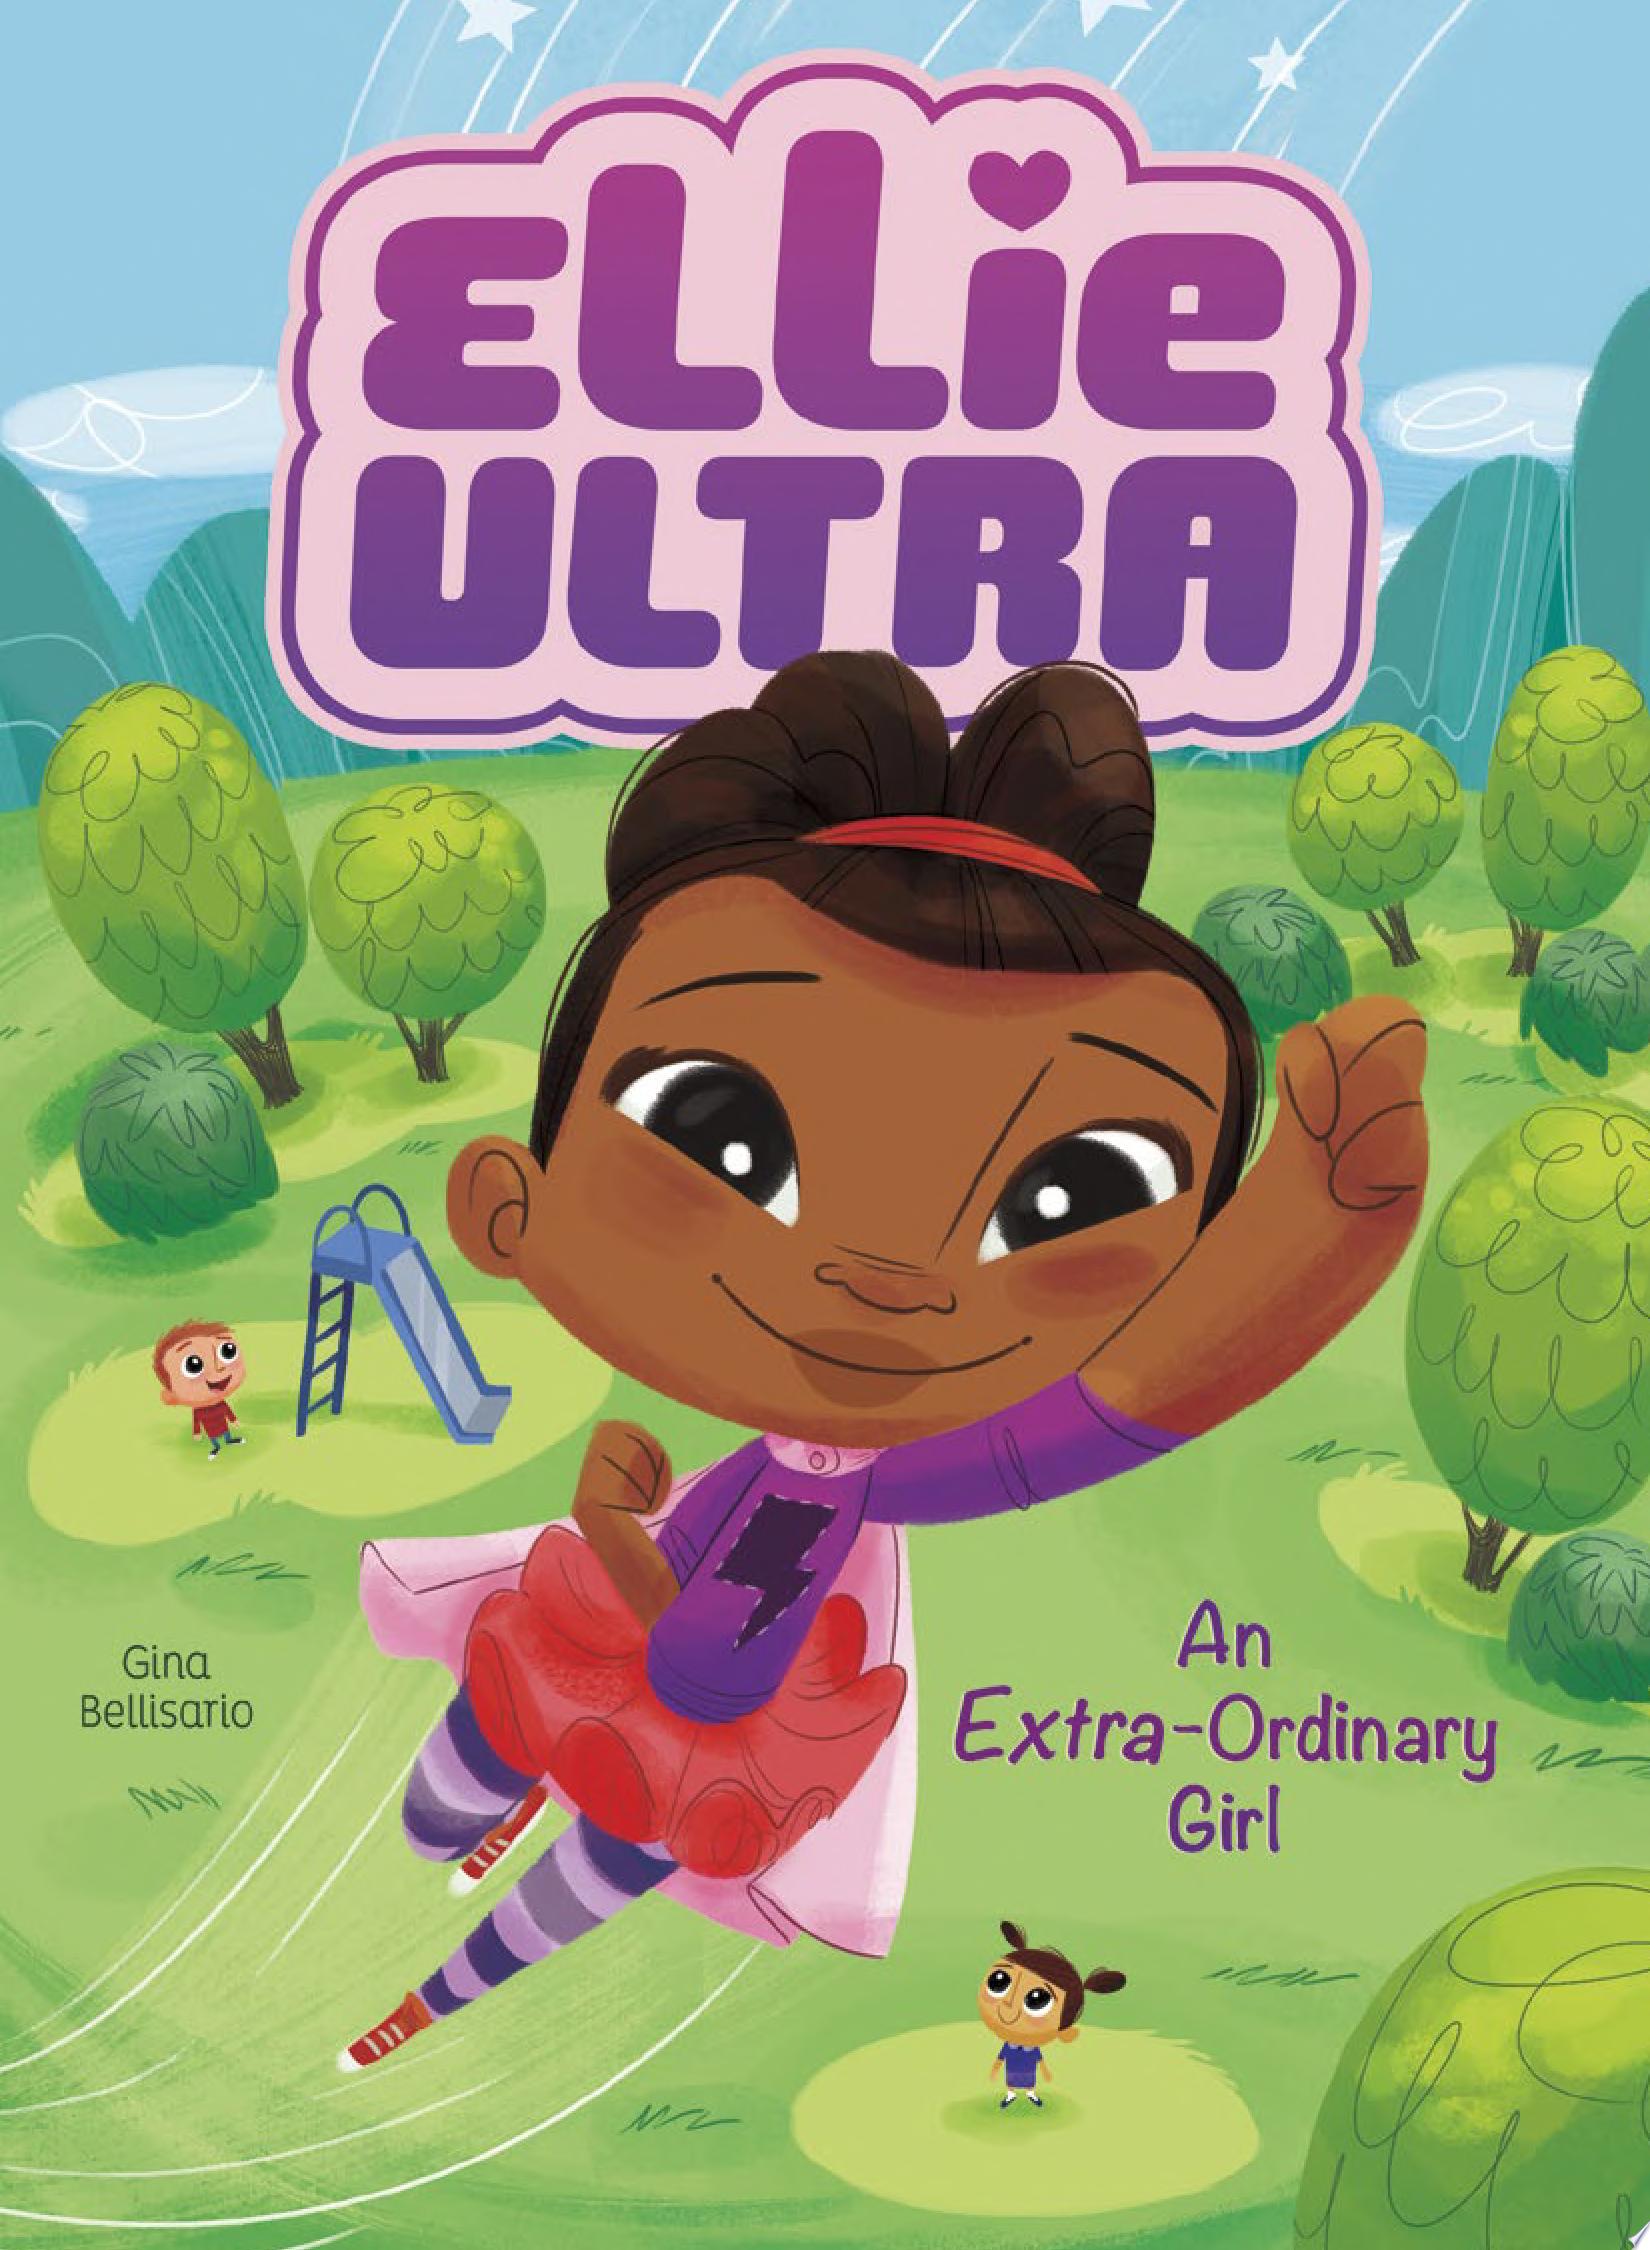 Image for "An Extra-Ordinary Girl"